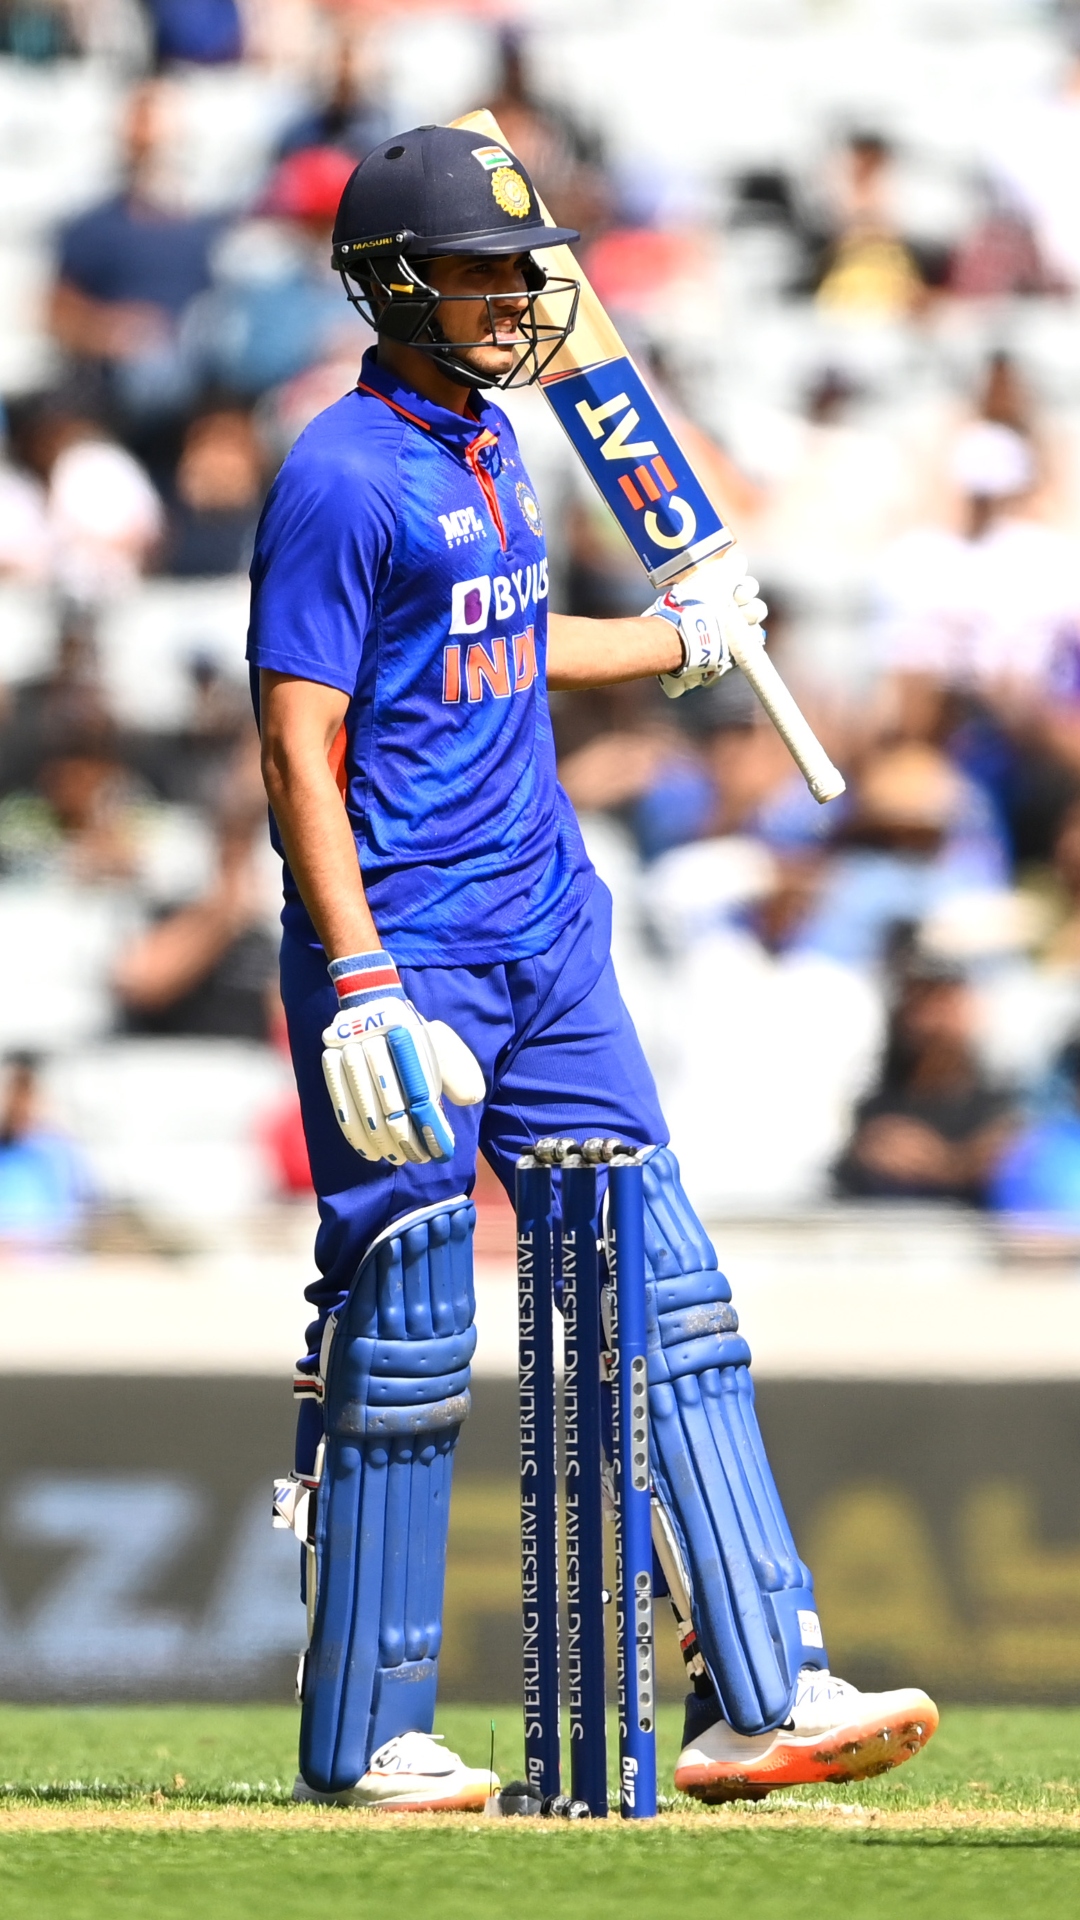 IND vs NZ 1st ODI: Highest individual scores for India in ODIs, featuring Shubman Gill and Virat Kohli